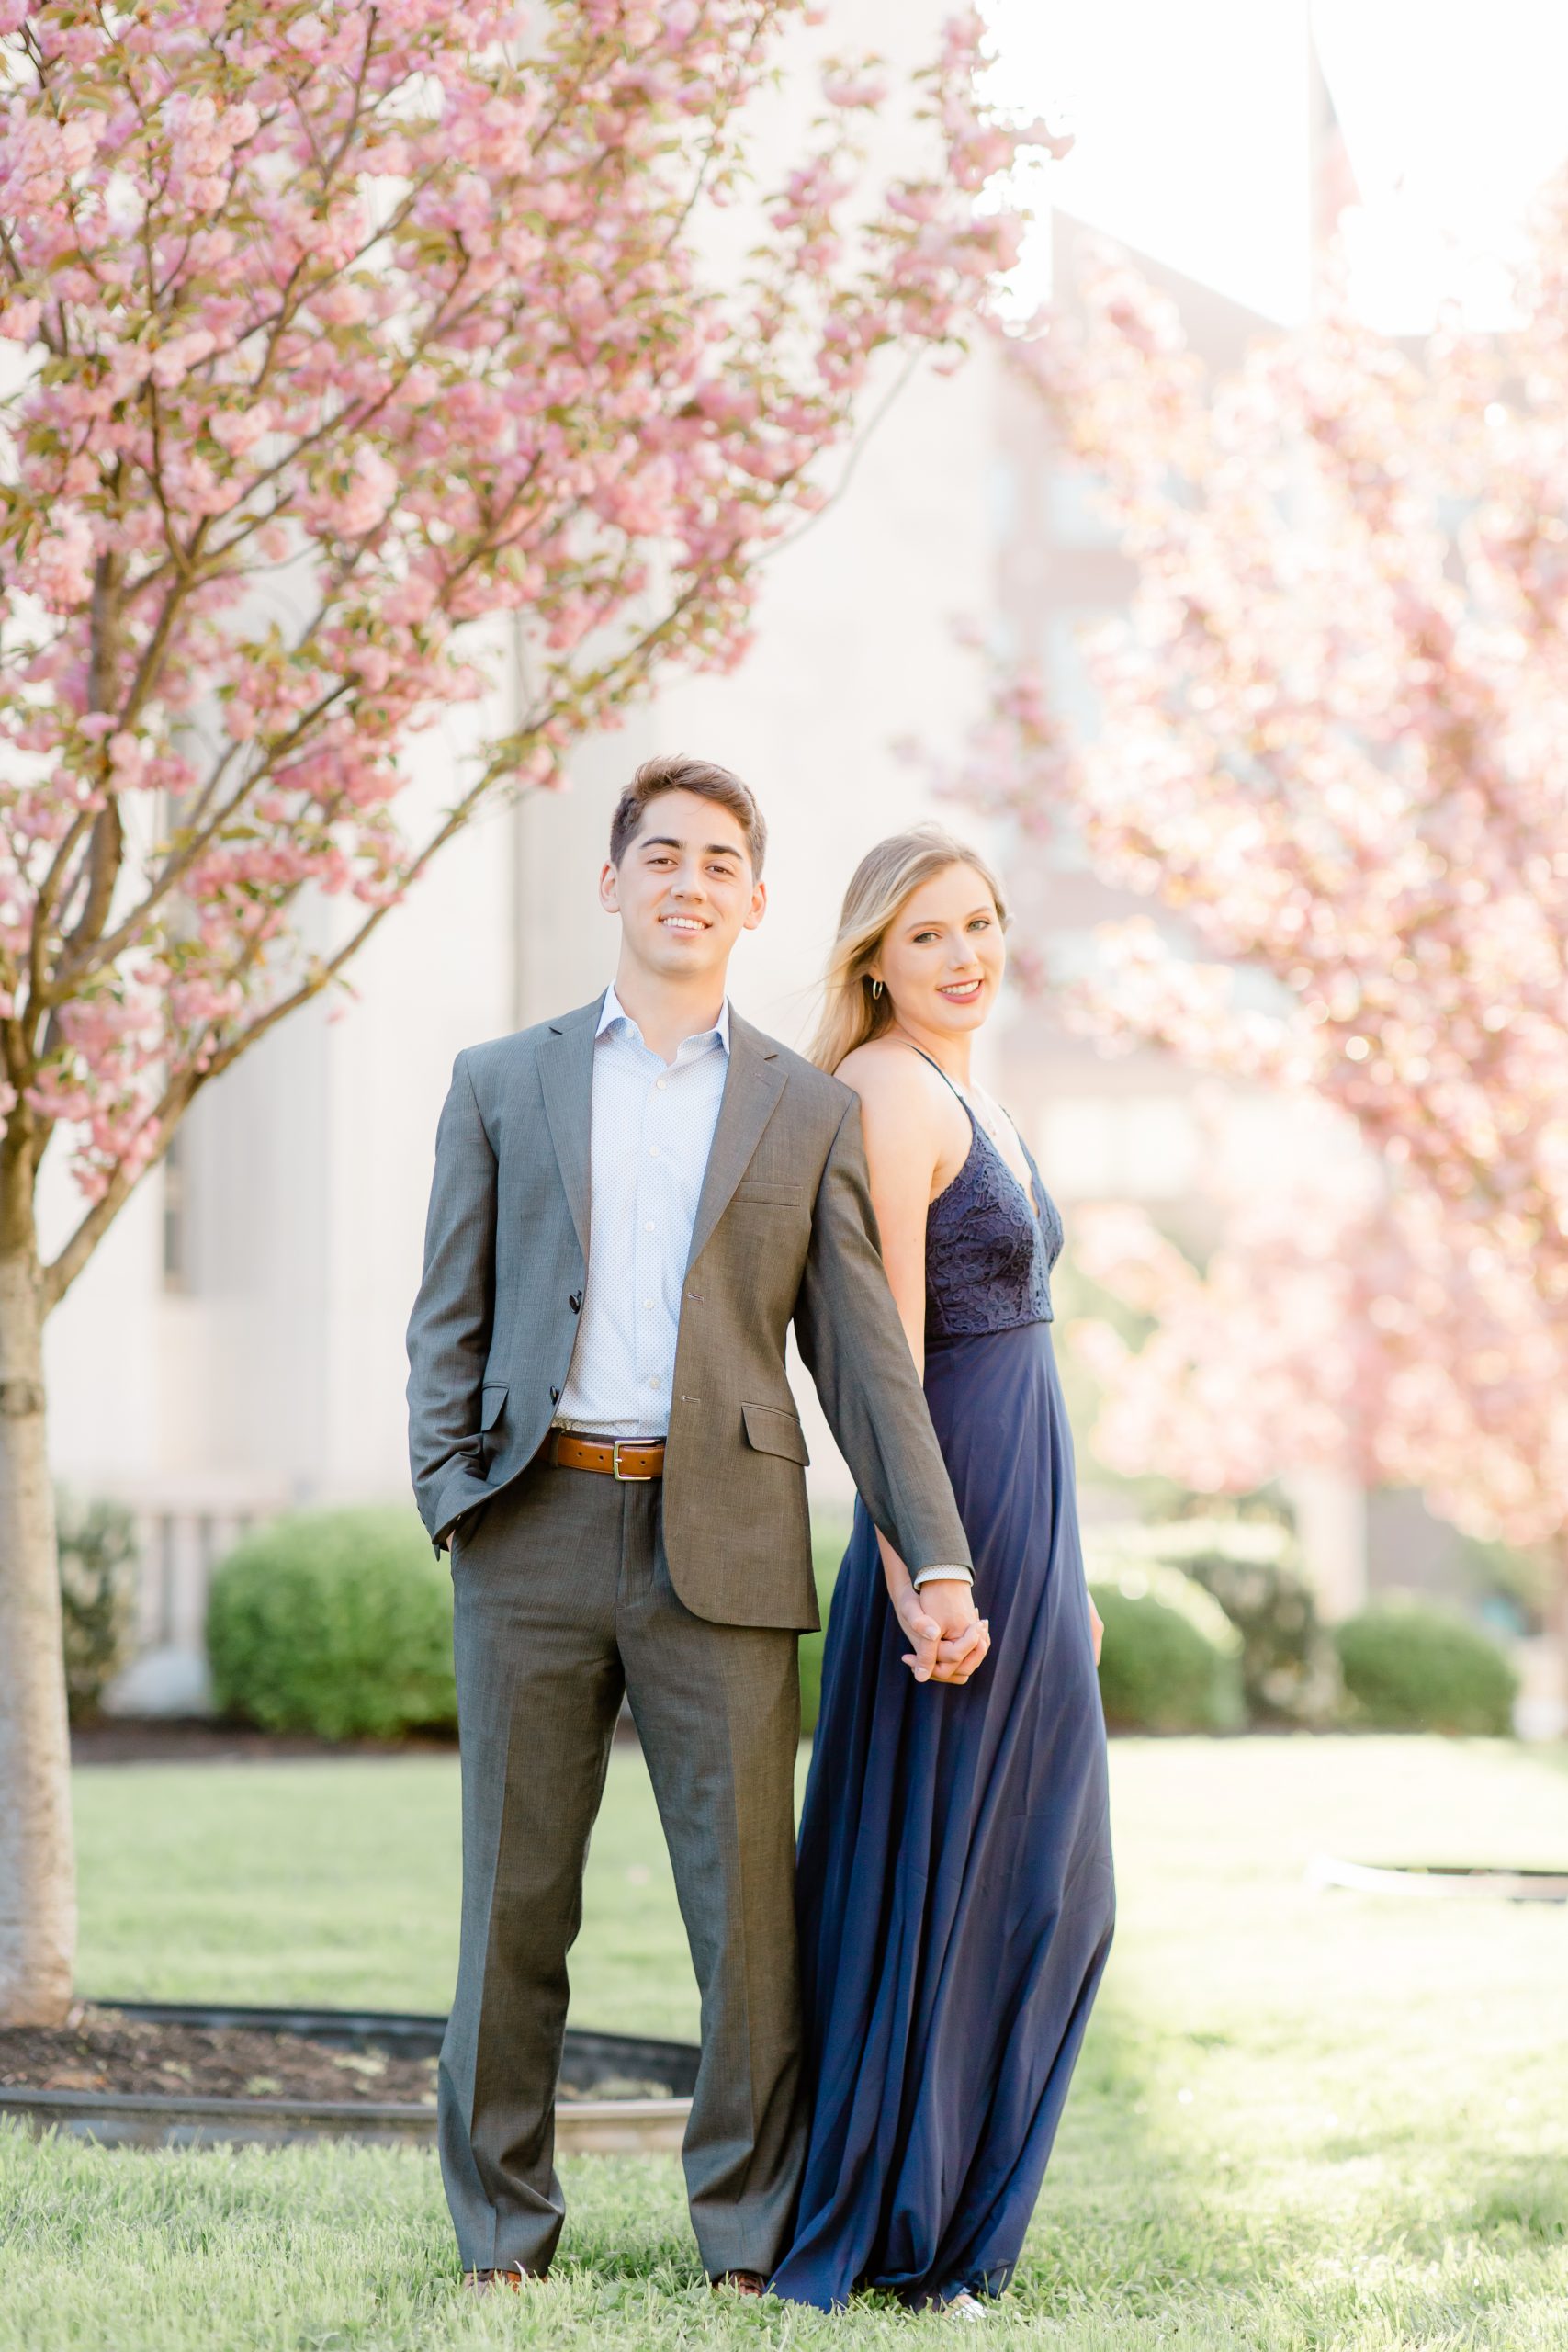 cherry blossom photo shoot in Downtown Chattanooga with chattanooga wedding photographer alyssa rachelle photography